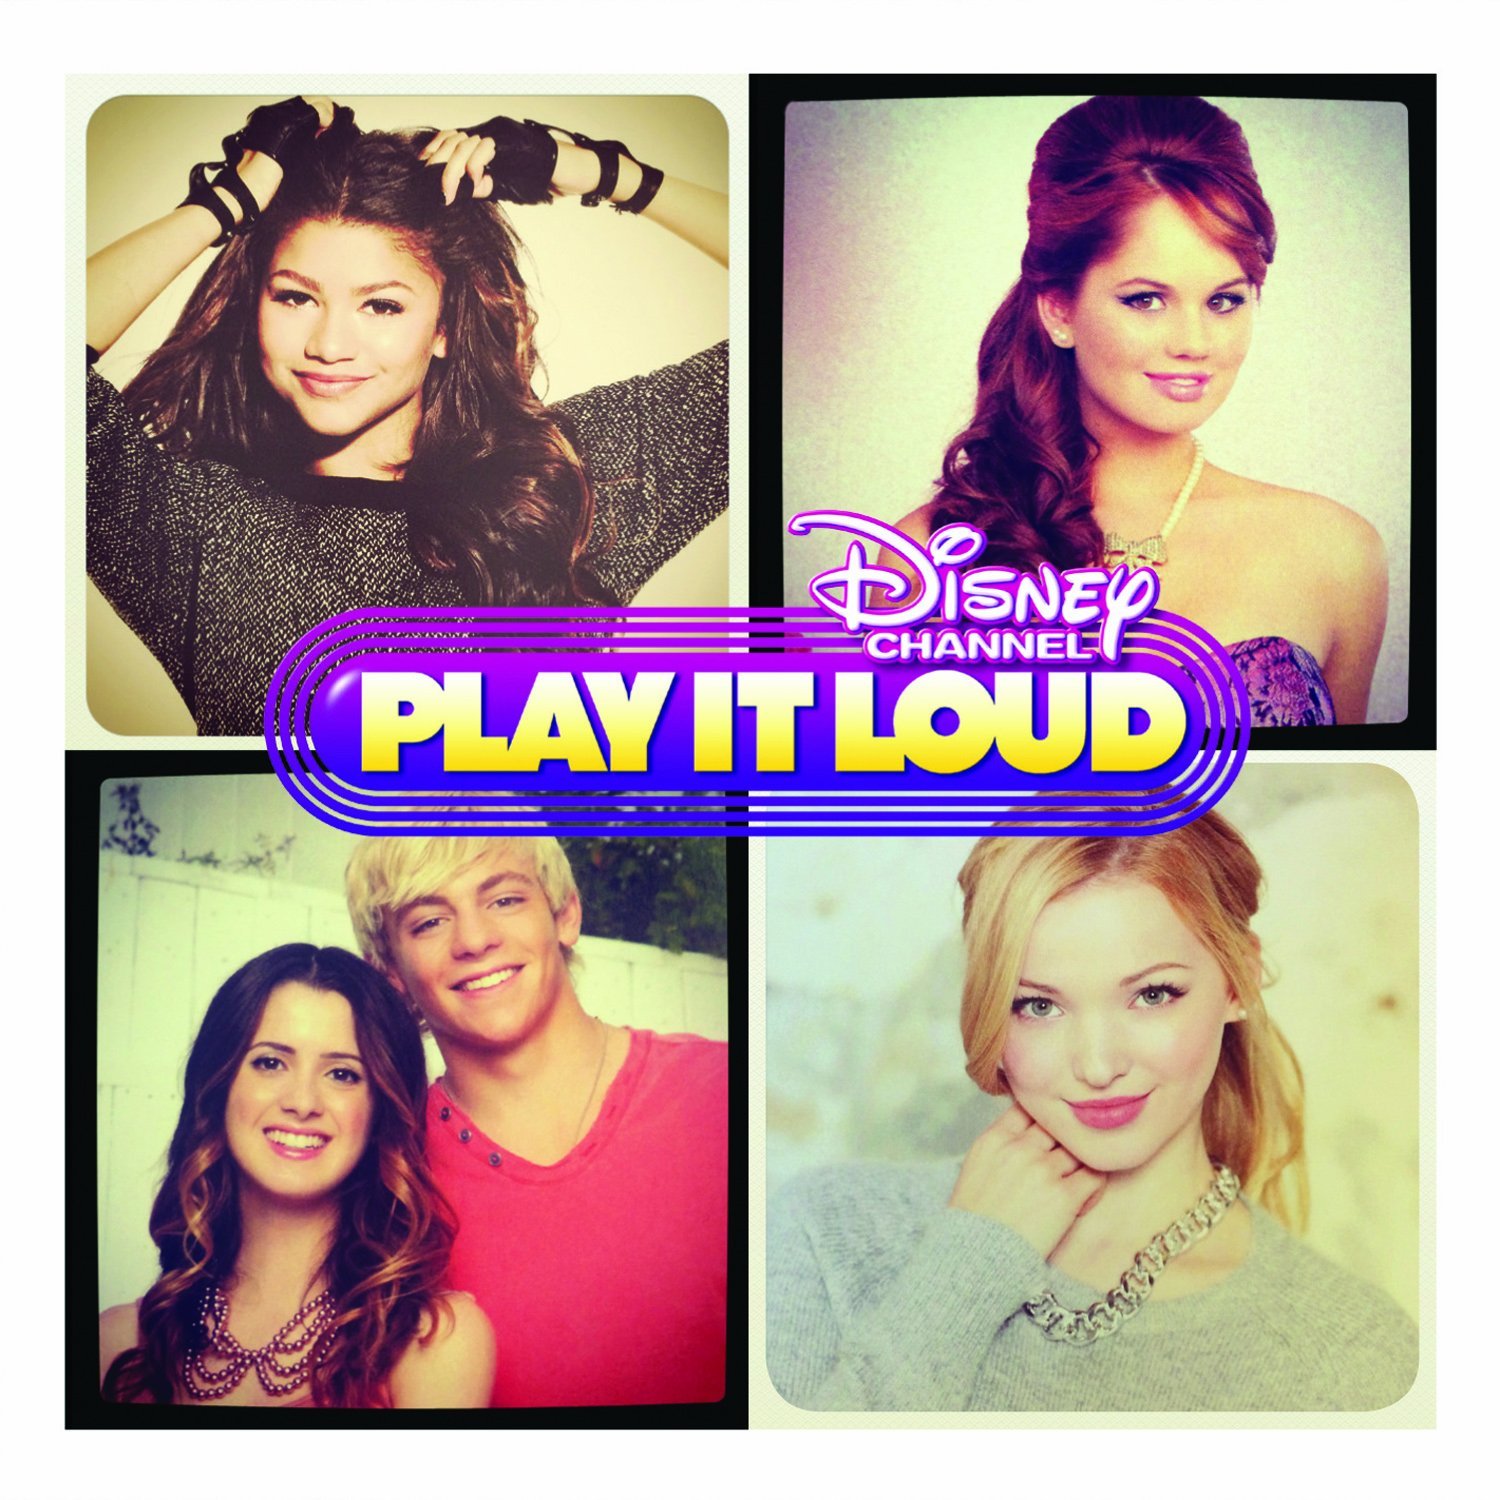 austin and ally videos and villains clipart